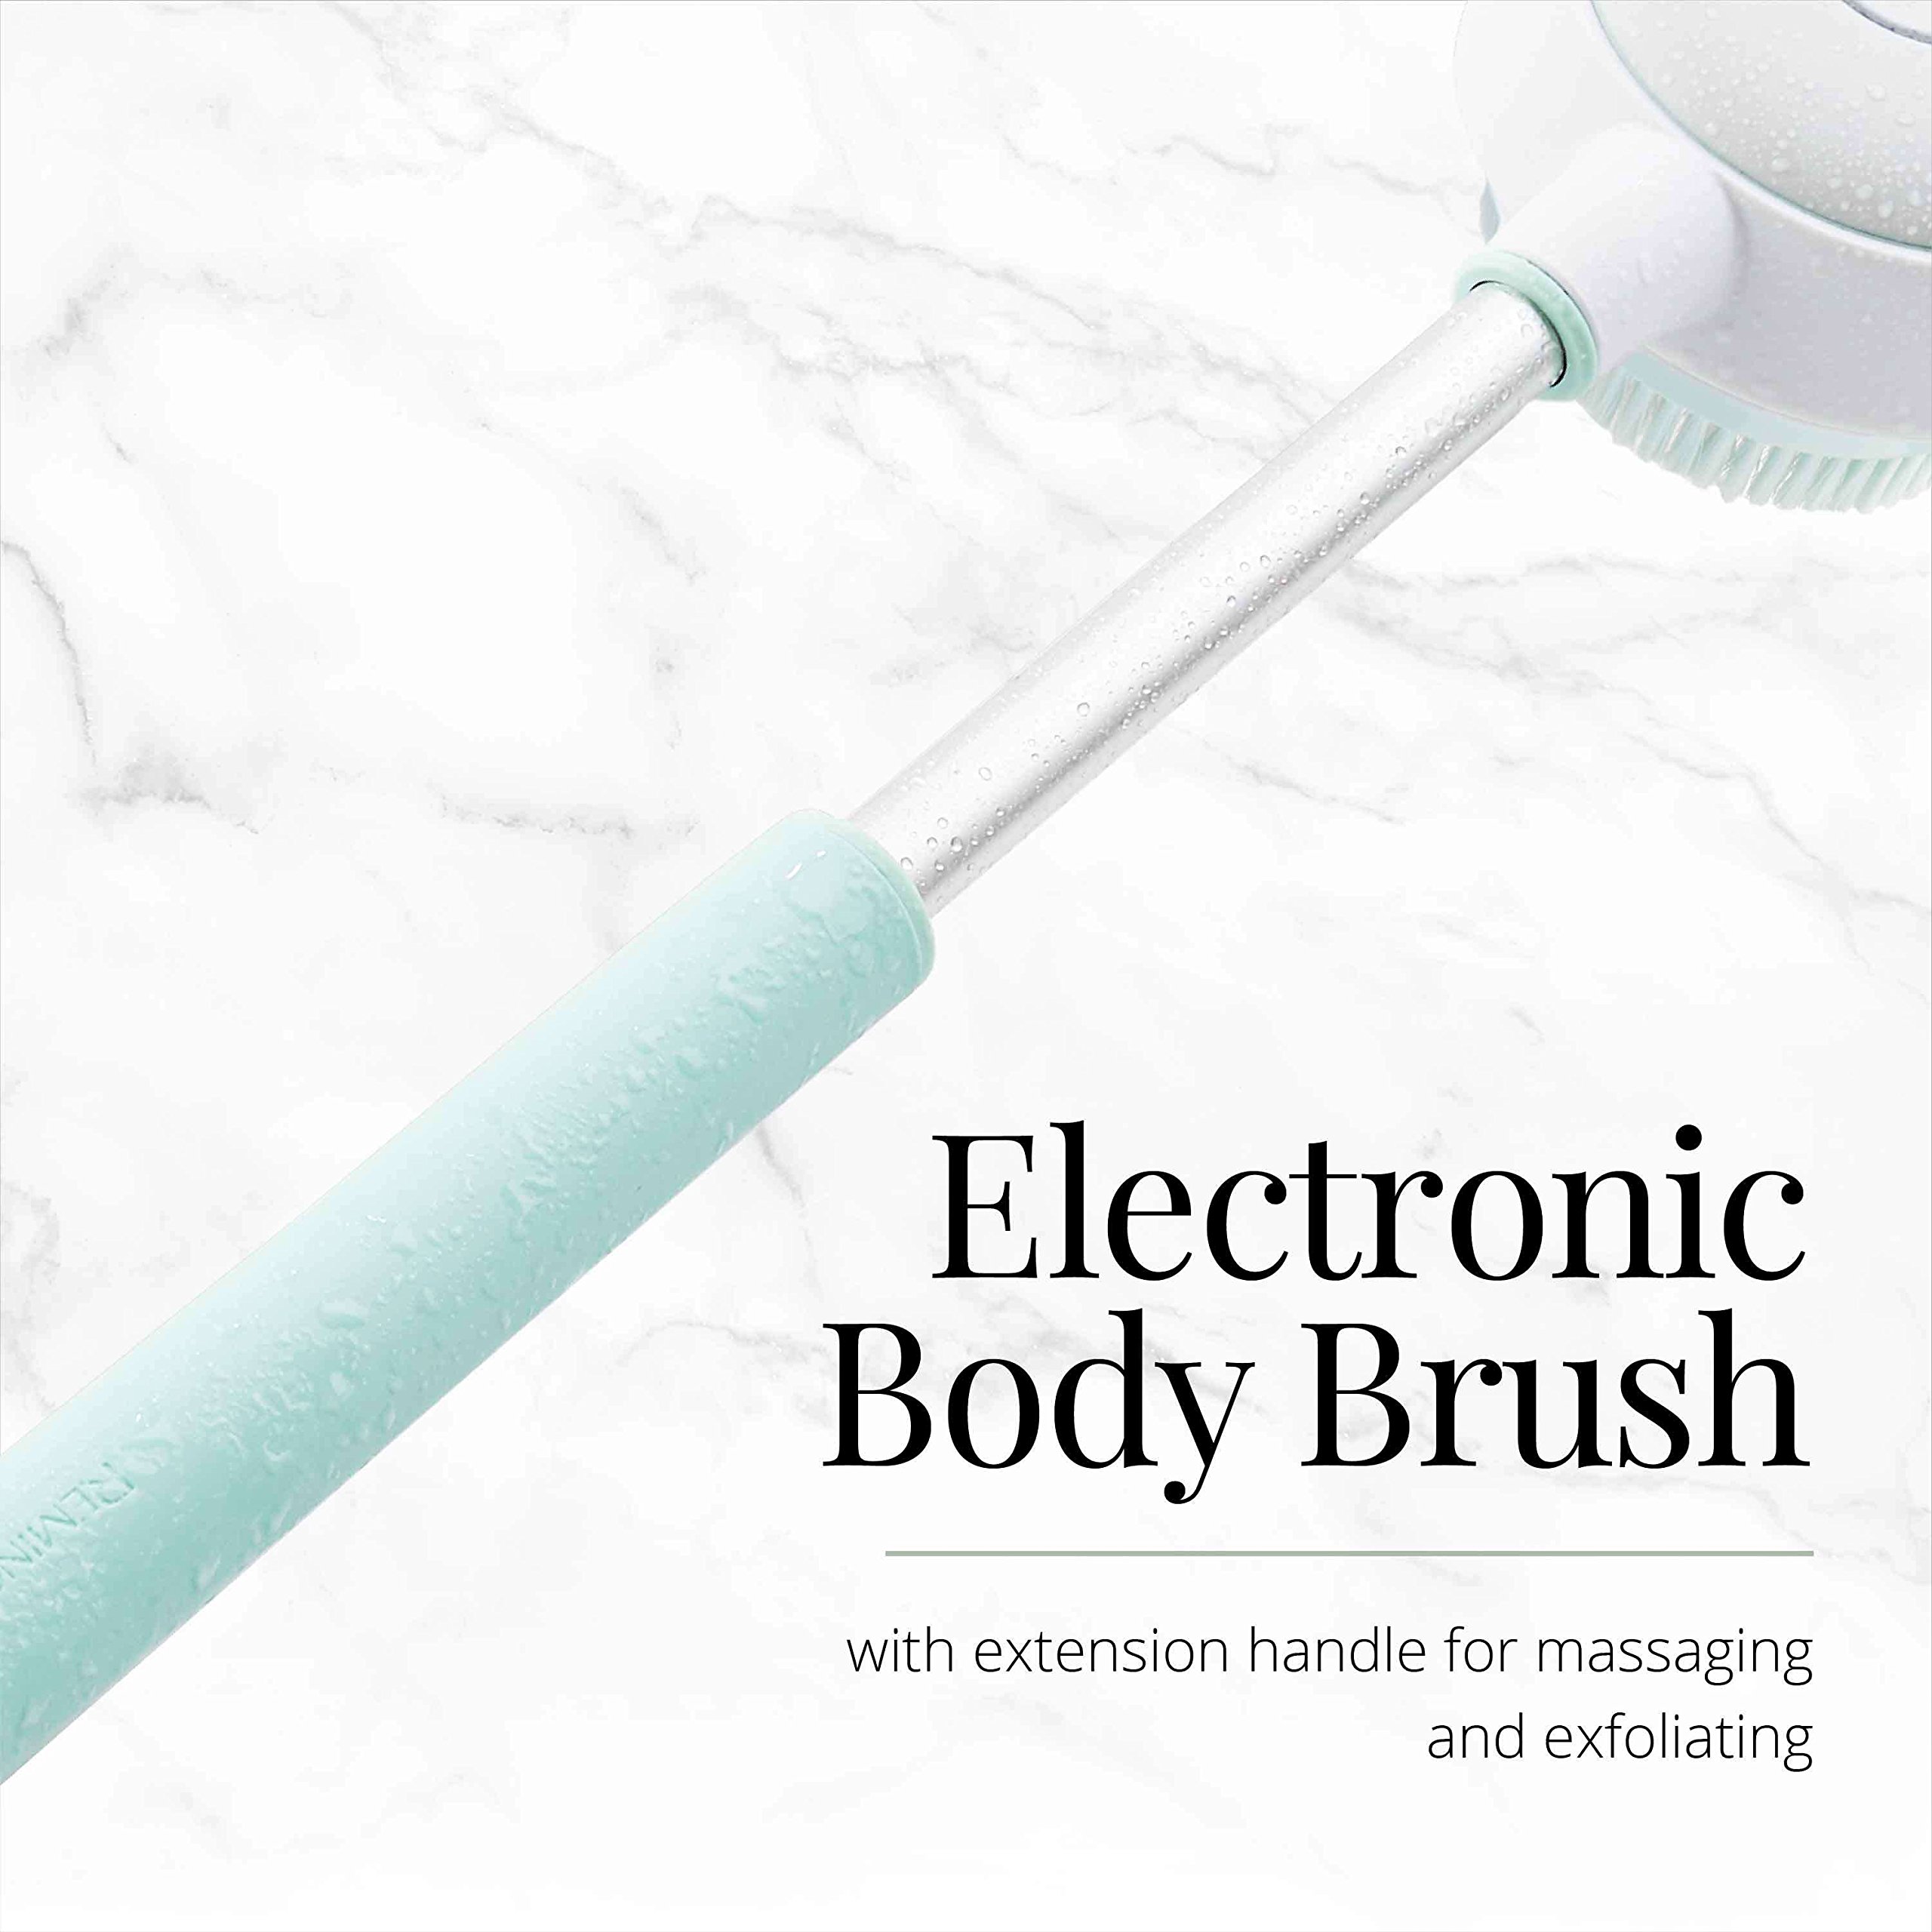 Remington Reveal Rechargeable Rotating Electronic Body Brush with 2 speeds and adjustable handle (BB1000B)